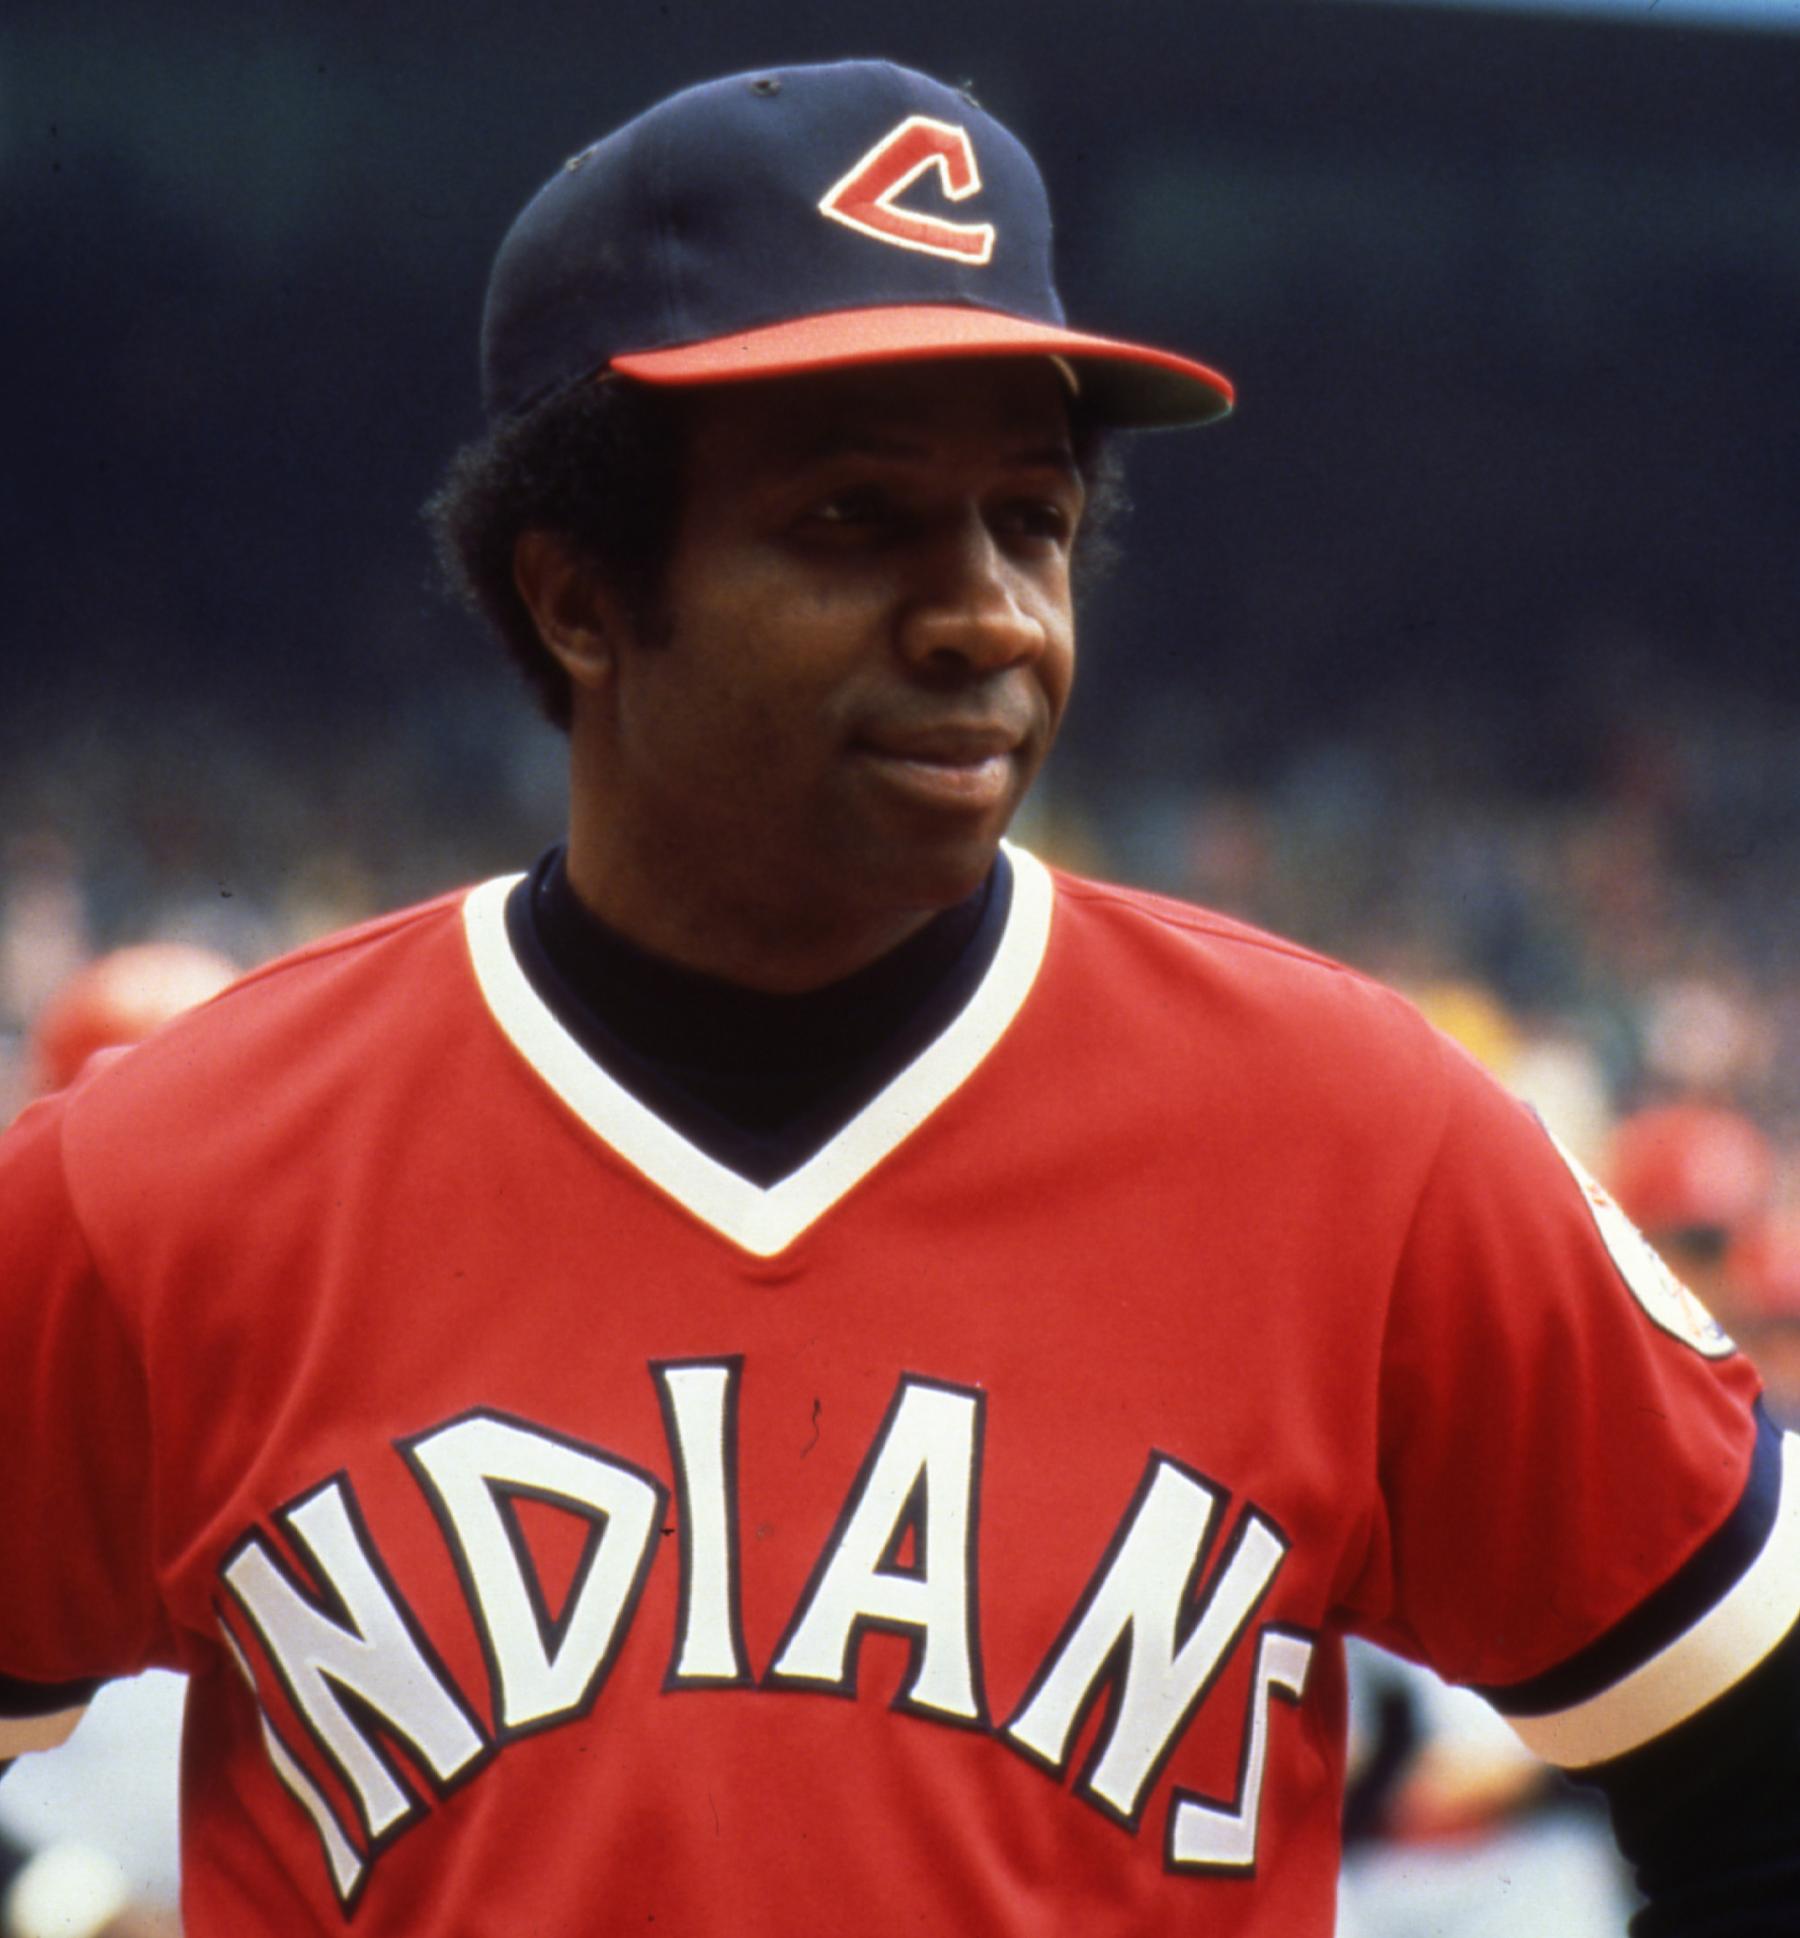 40 years ago today, the Orioles had their first Hall of Famer: Frank